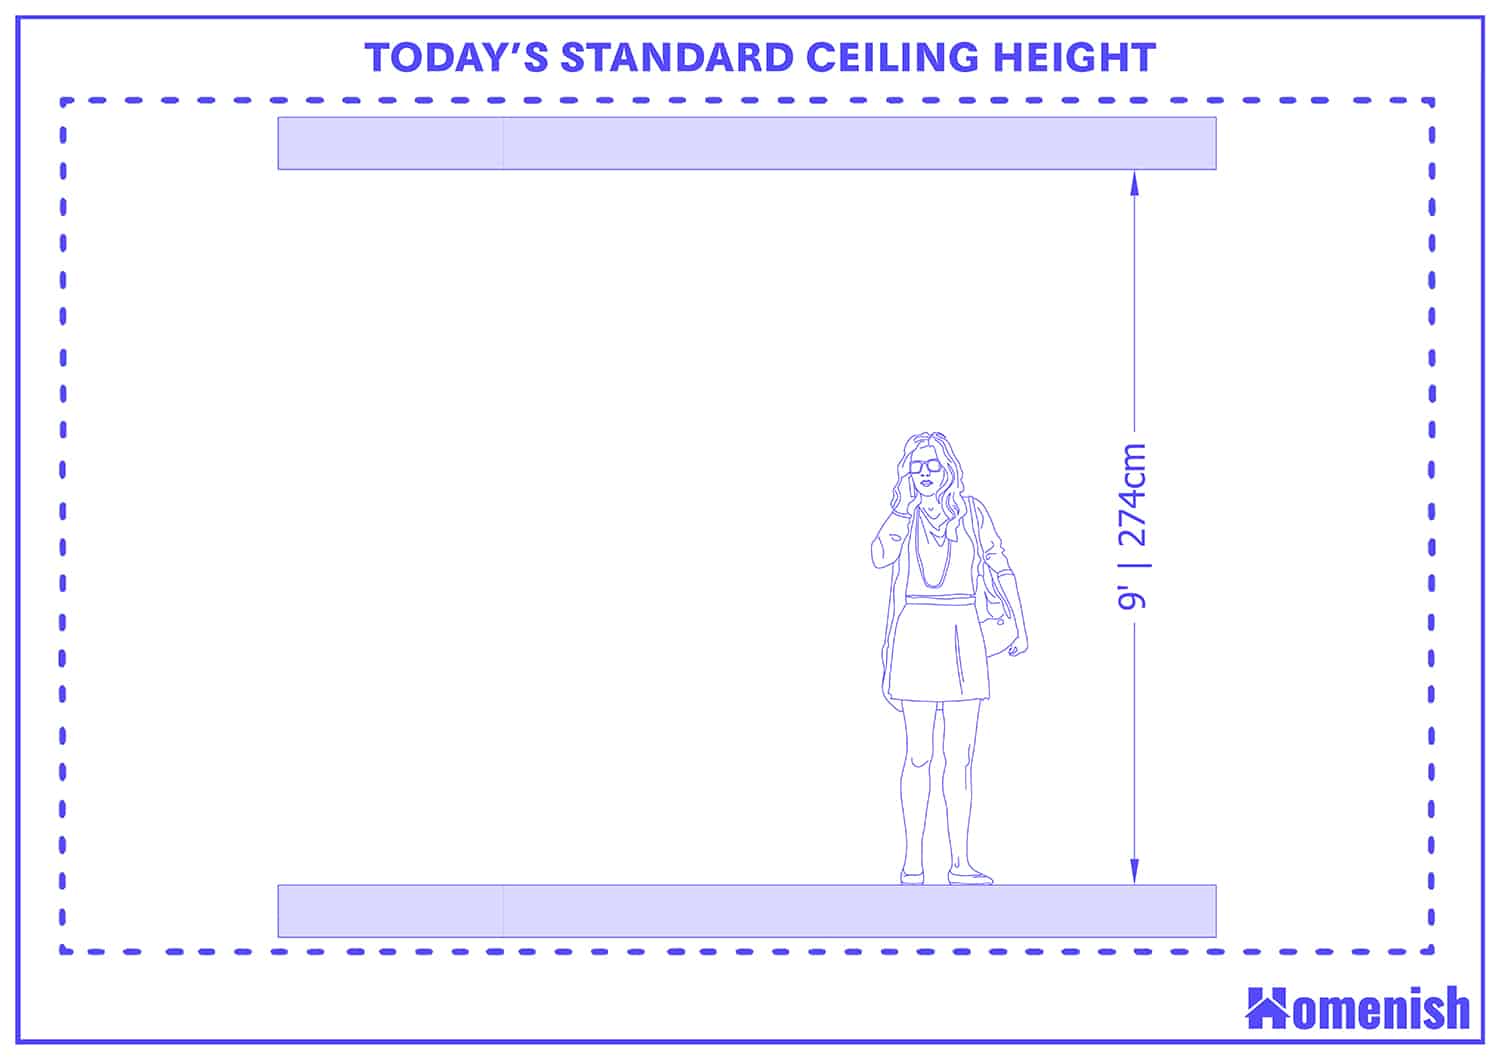 Today’s Standard Ceiling Height